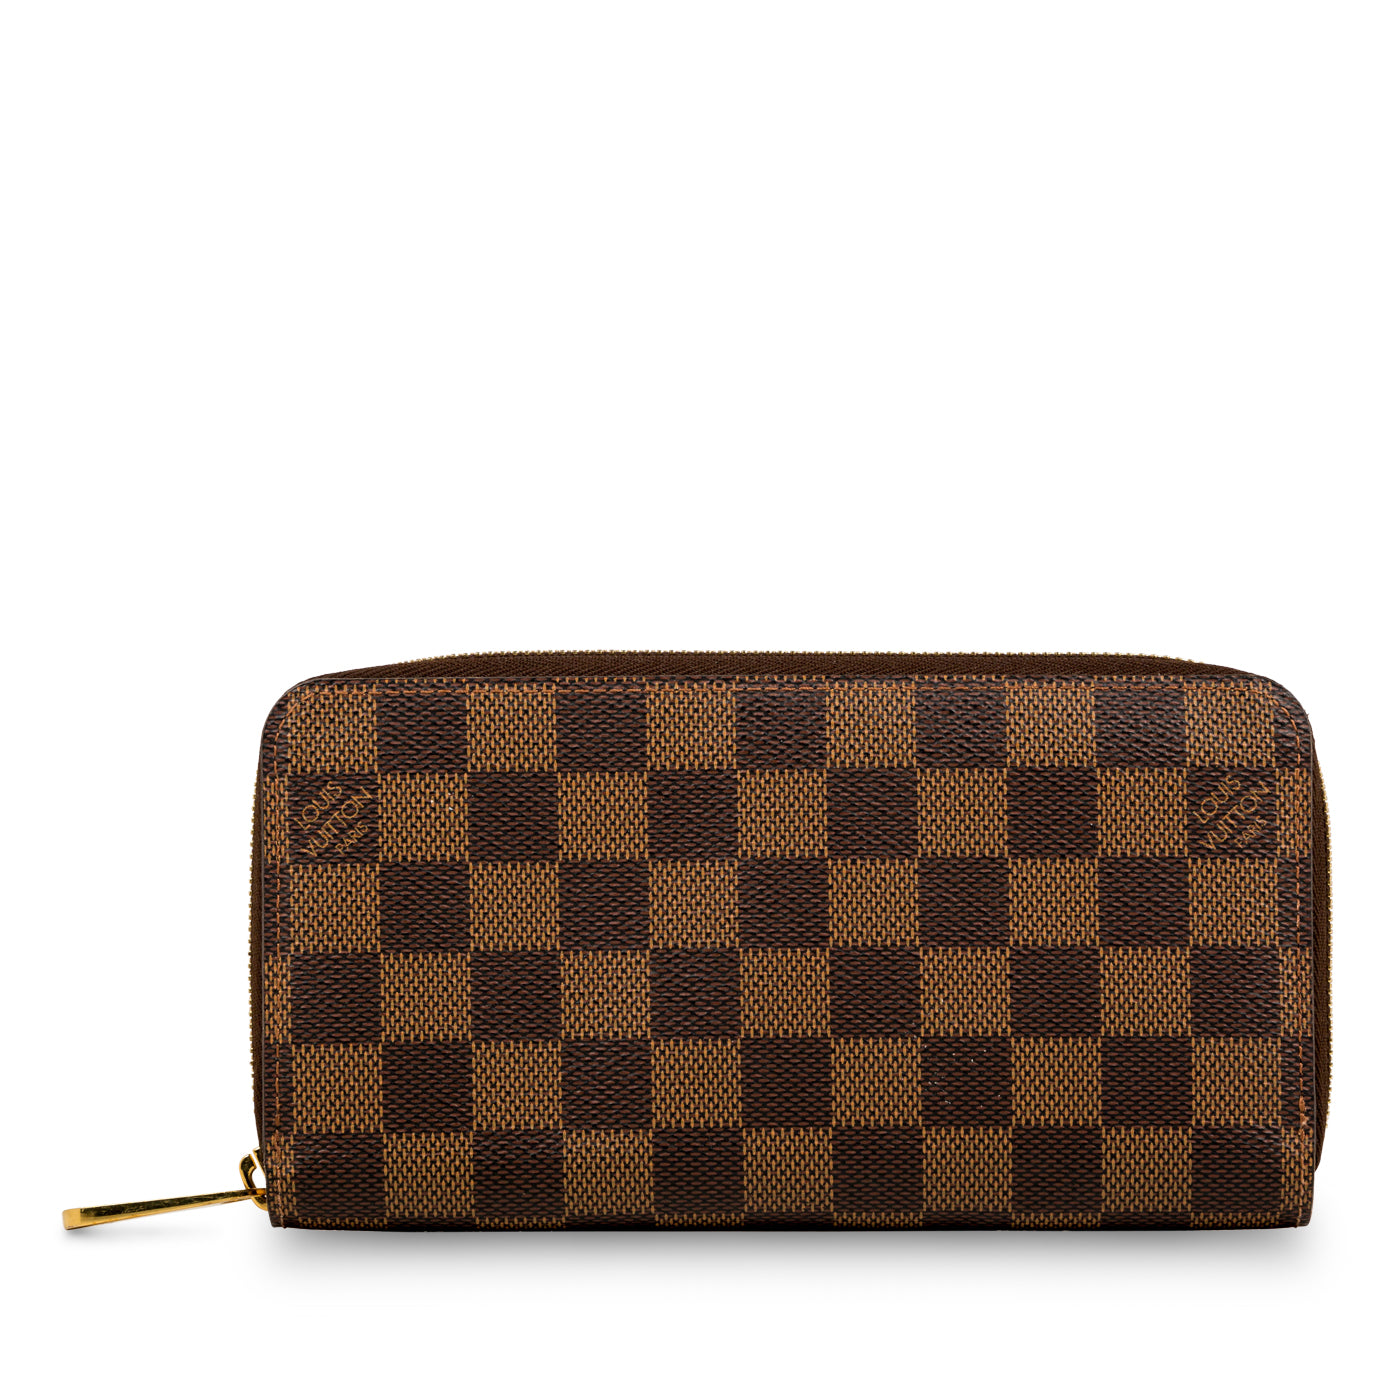 Slender Wallet Damier Graphite Canvas  Wallets and Small Leather Goods  LOUIS  VUITTON